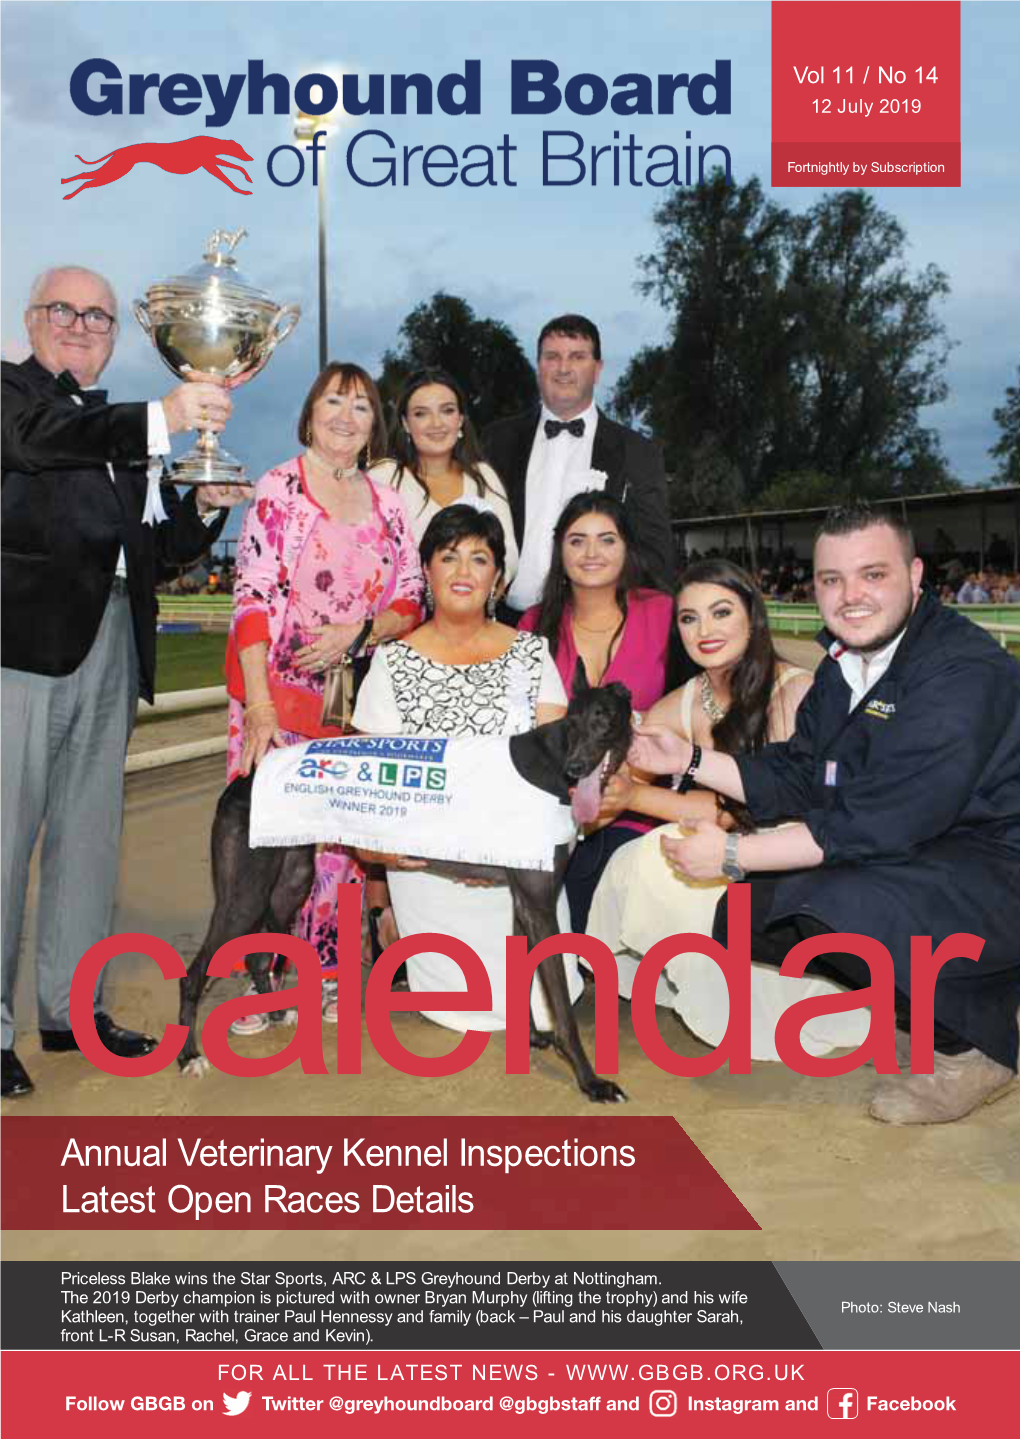 Annual Veterinary Kennel Inspections Latest Open Races Details